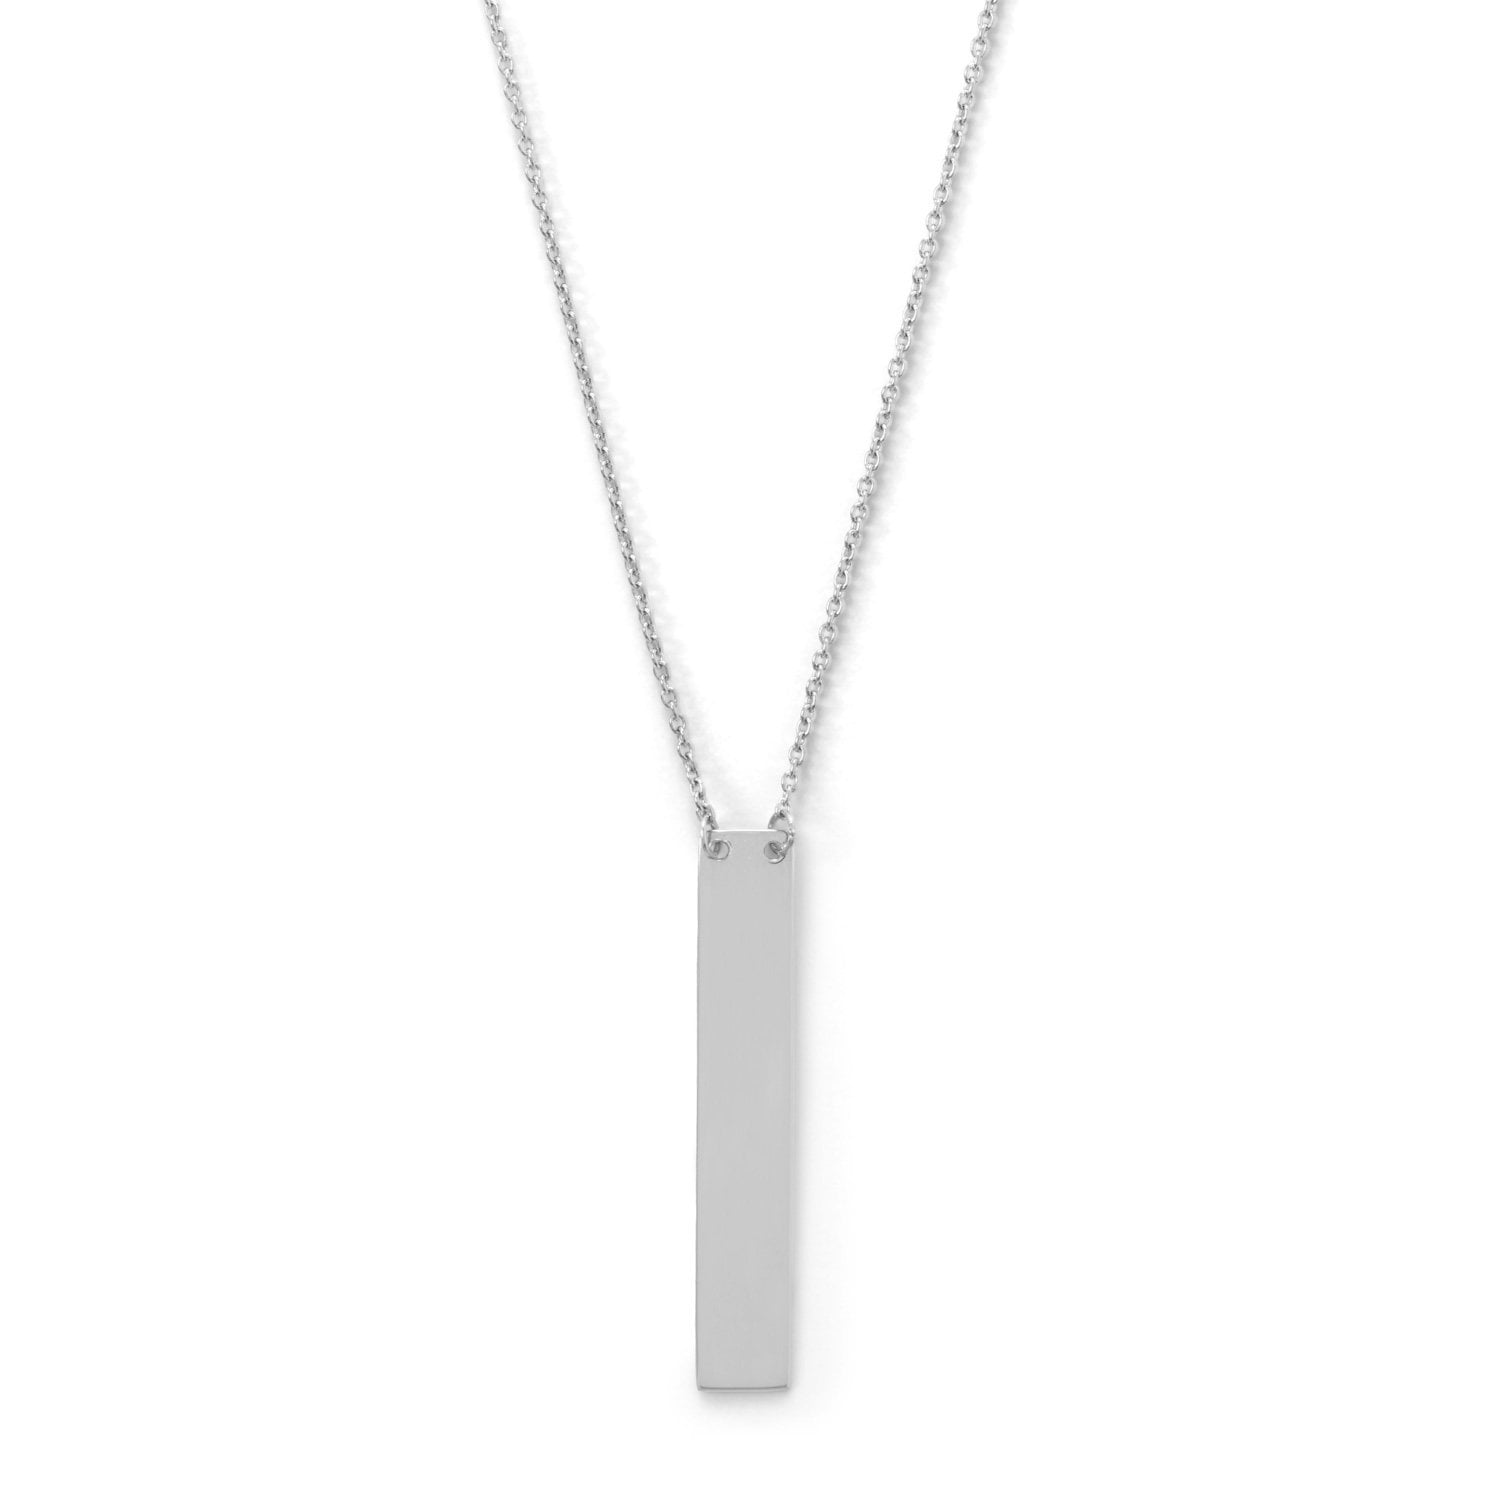 Wedding Season Import 6mm Cube Pendant with CZ Necklace Sterling Silver Adjustable 16inch with 2inch Extension 